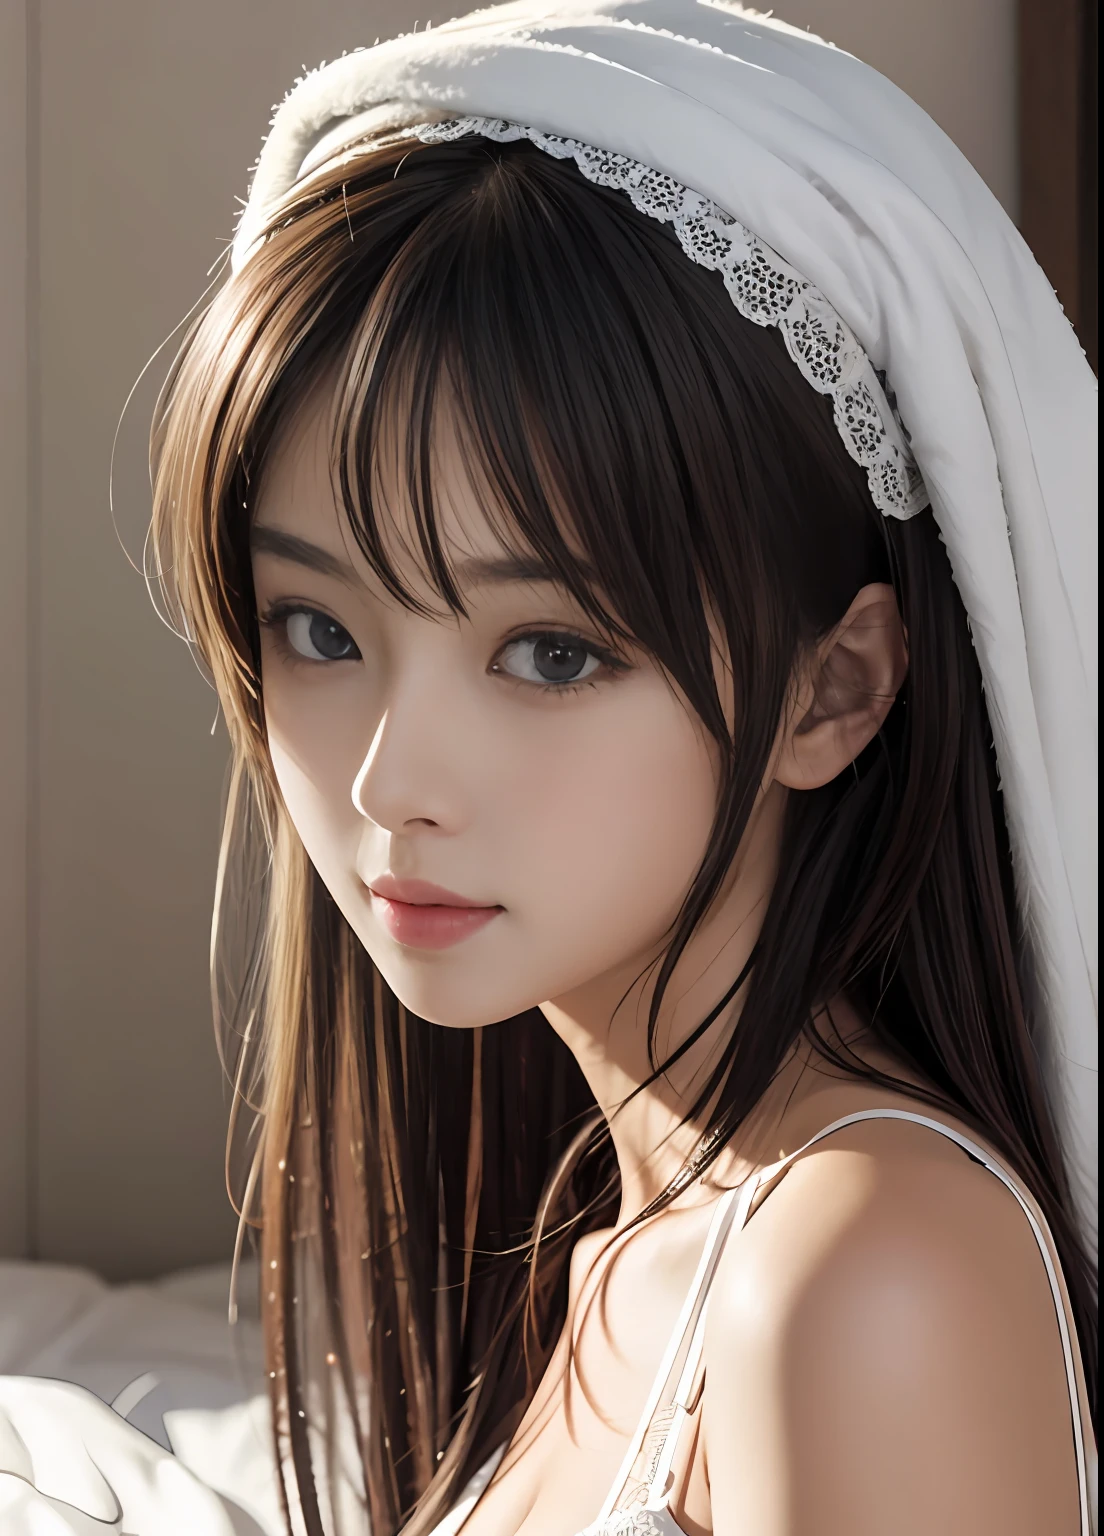 (top-quality:0.8)、(top-quality:0.8)、perfect anime illustration、Extreme close-up portrait of beautiful woman in white underwear relaxing in bedroom